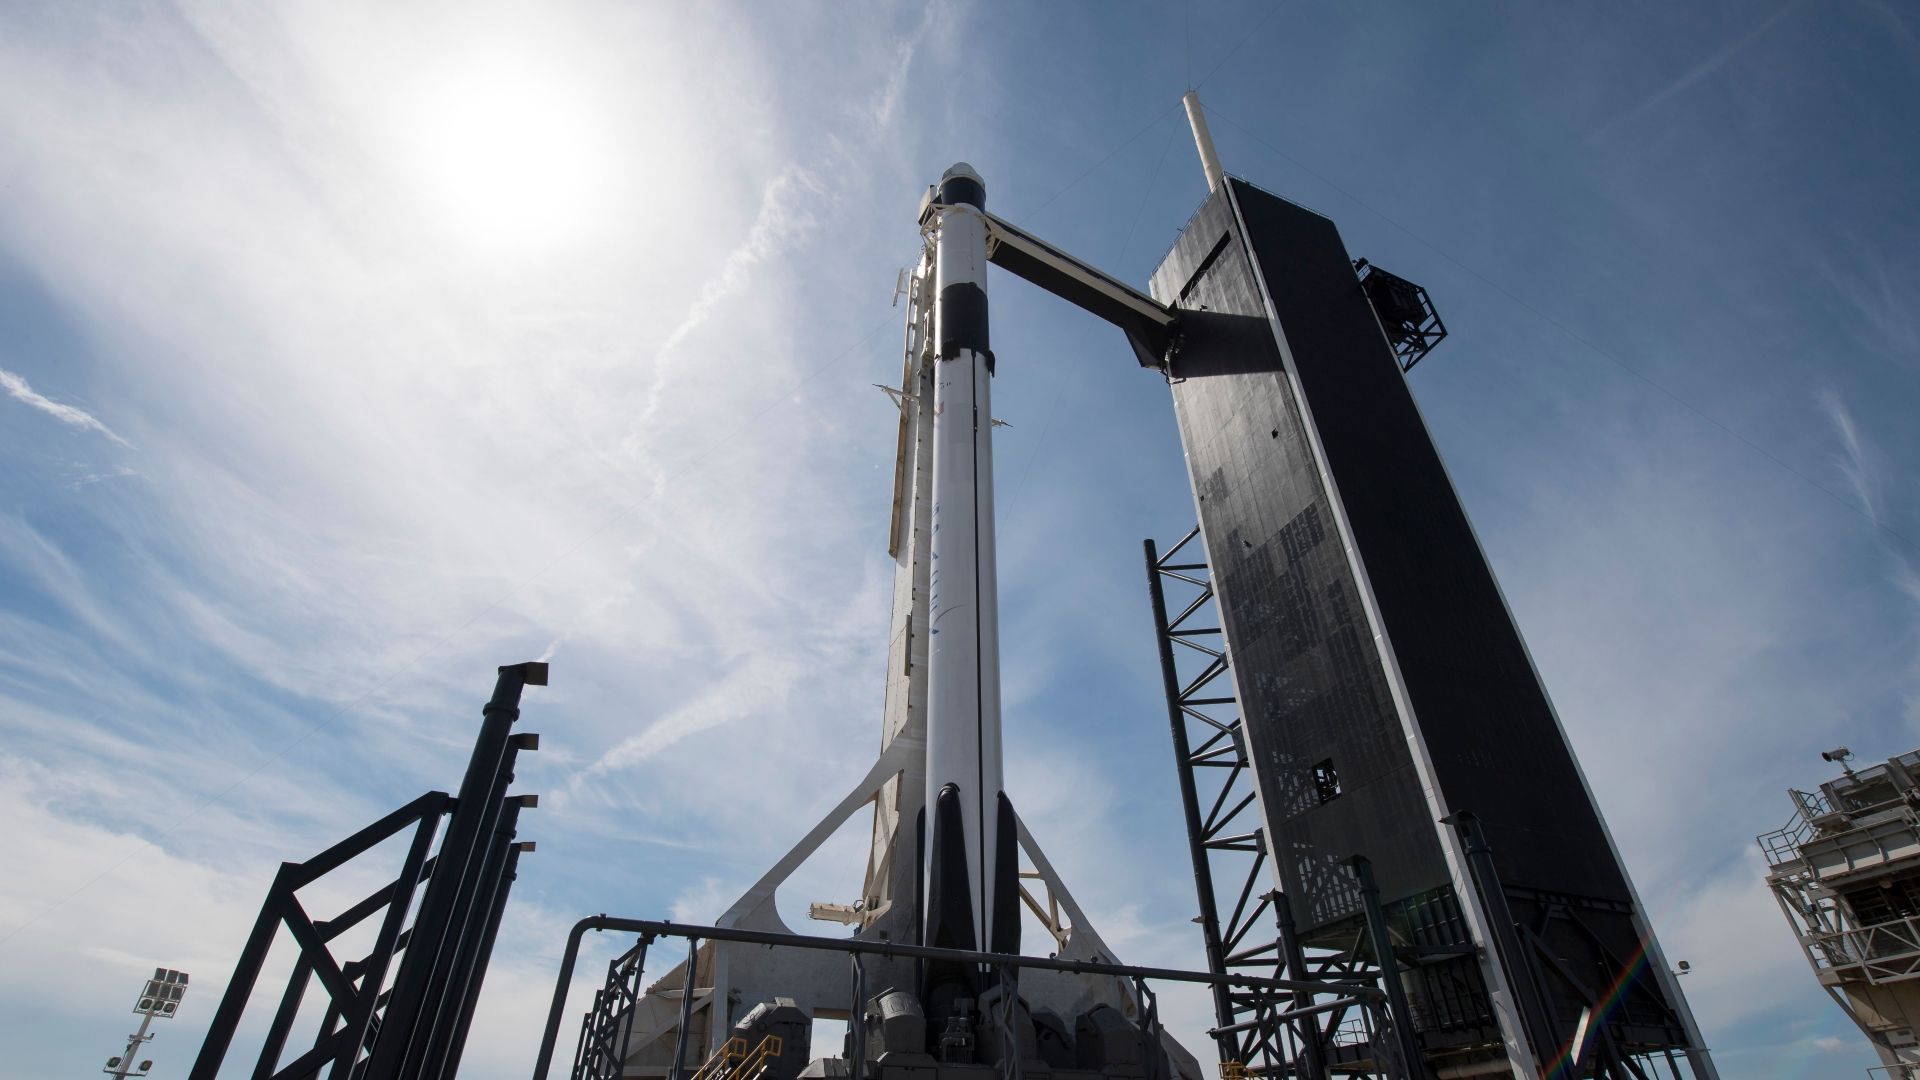 Next SpaceX launch: Elon Musk faces his biggest challenge